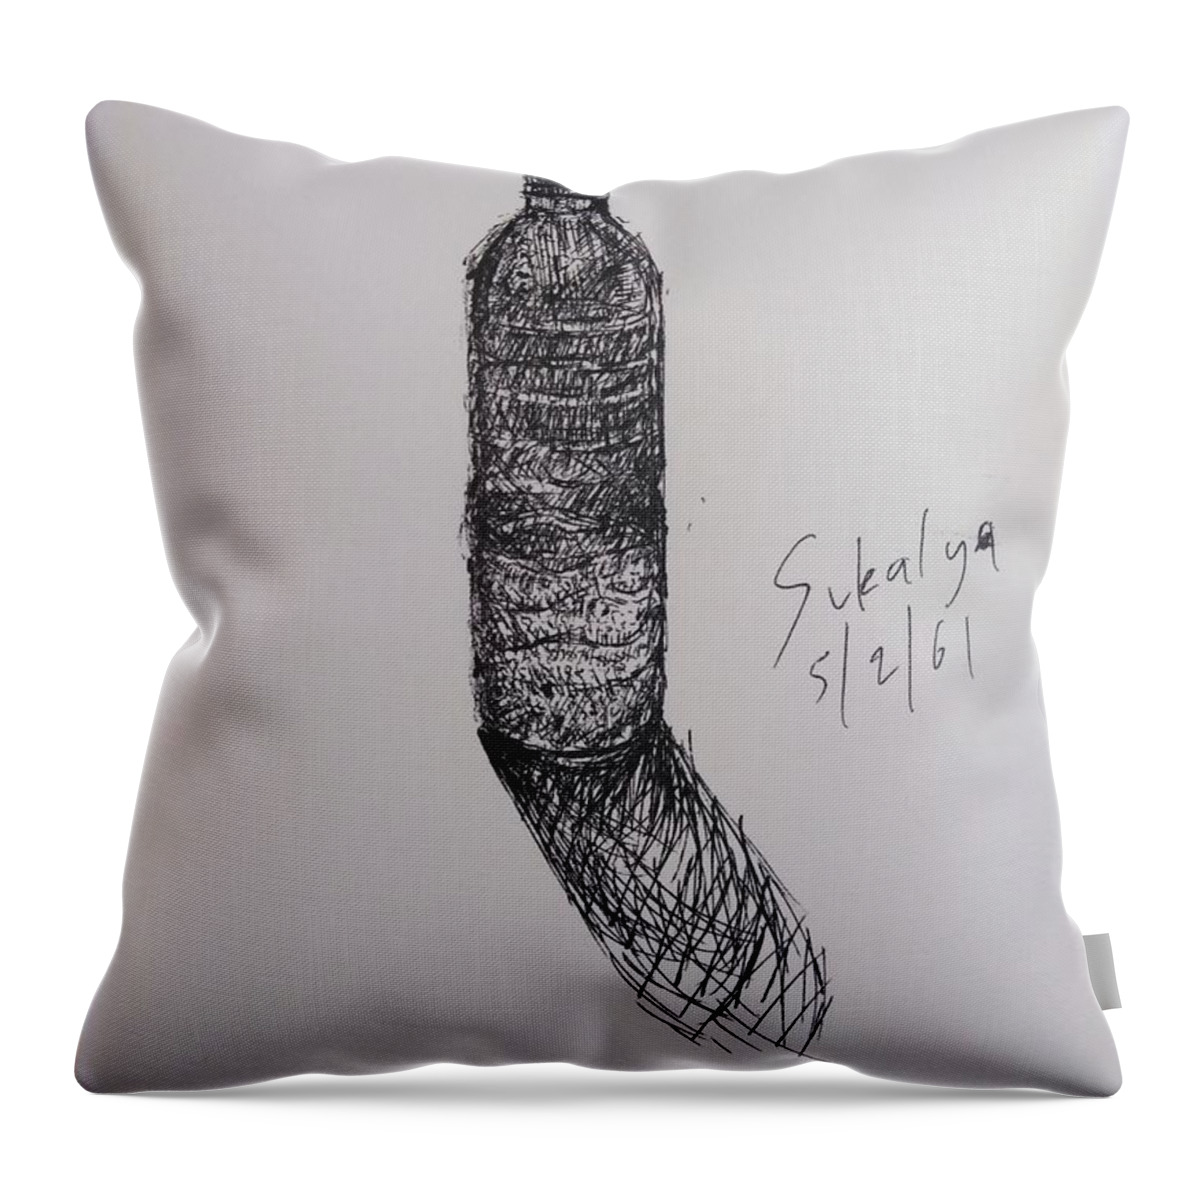 Bottle Throw Pillow featuring the drawing A bottle by Sukalya Chearanantana